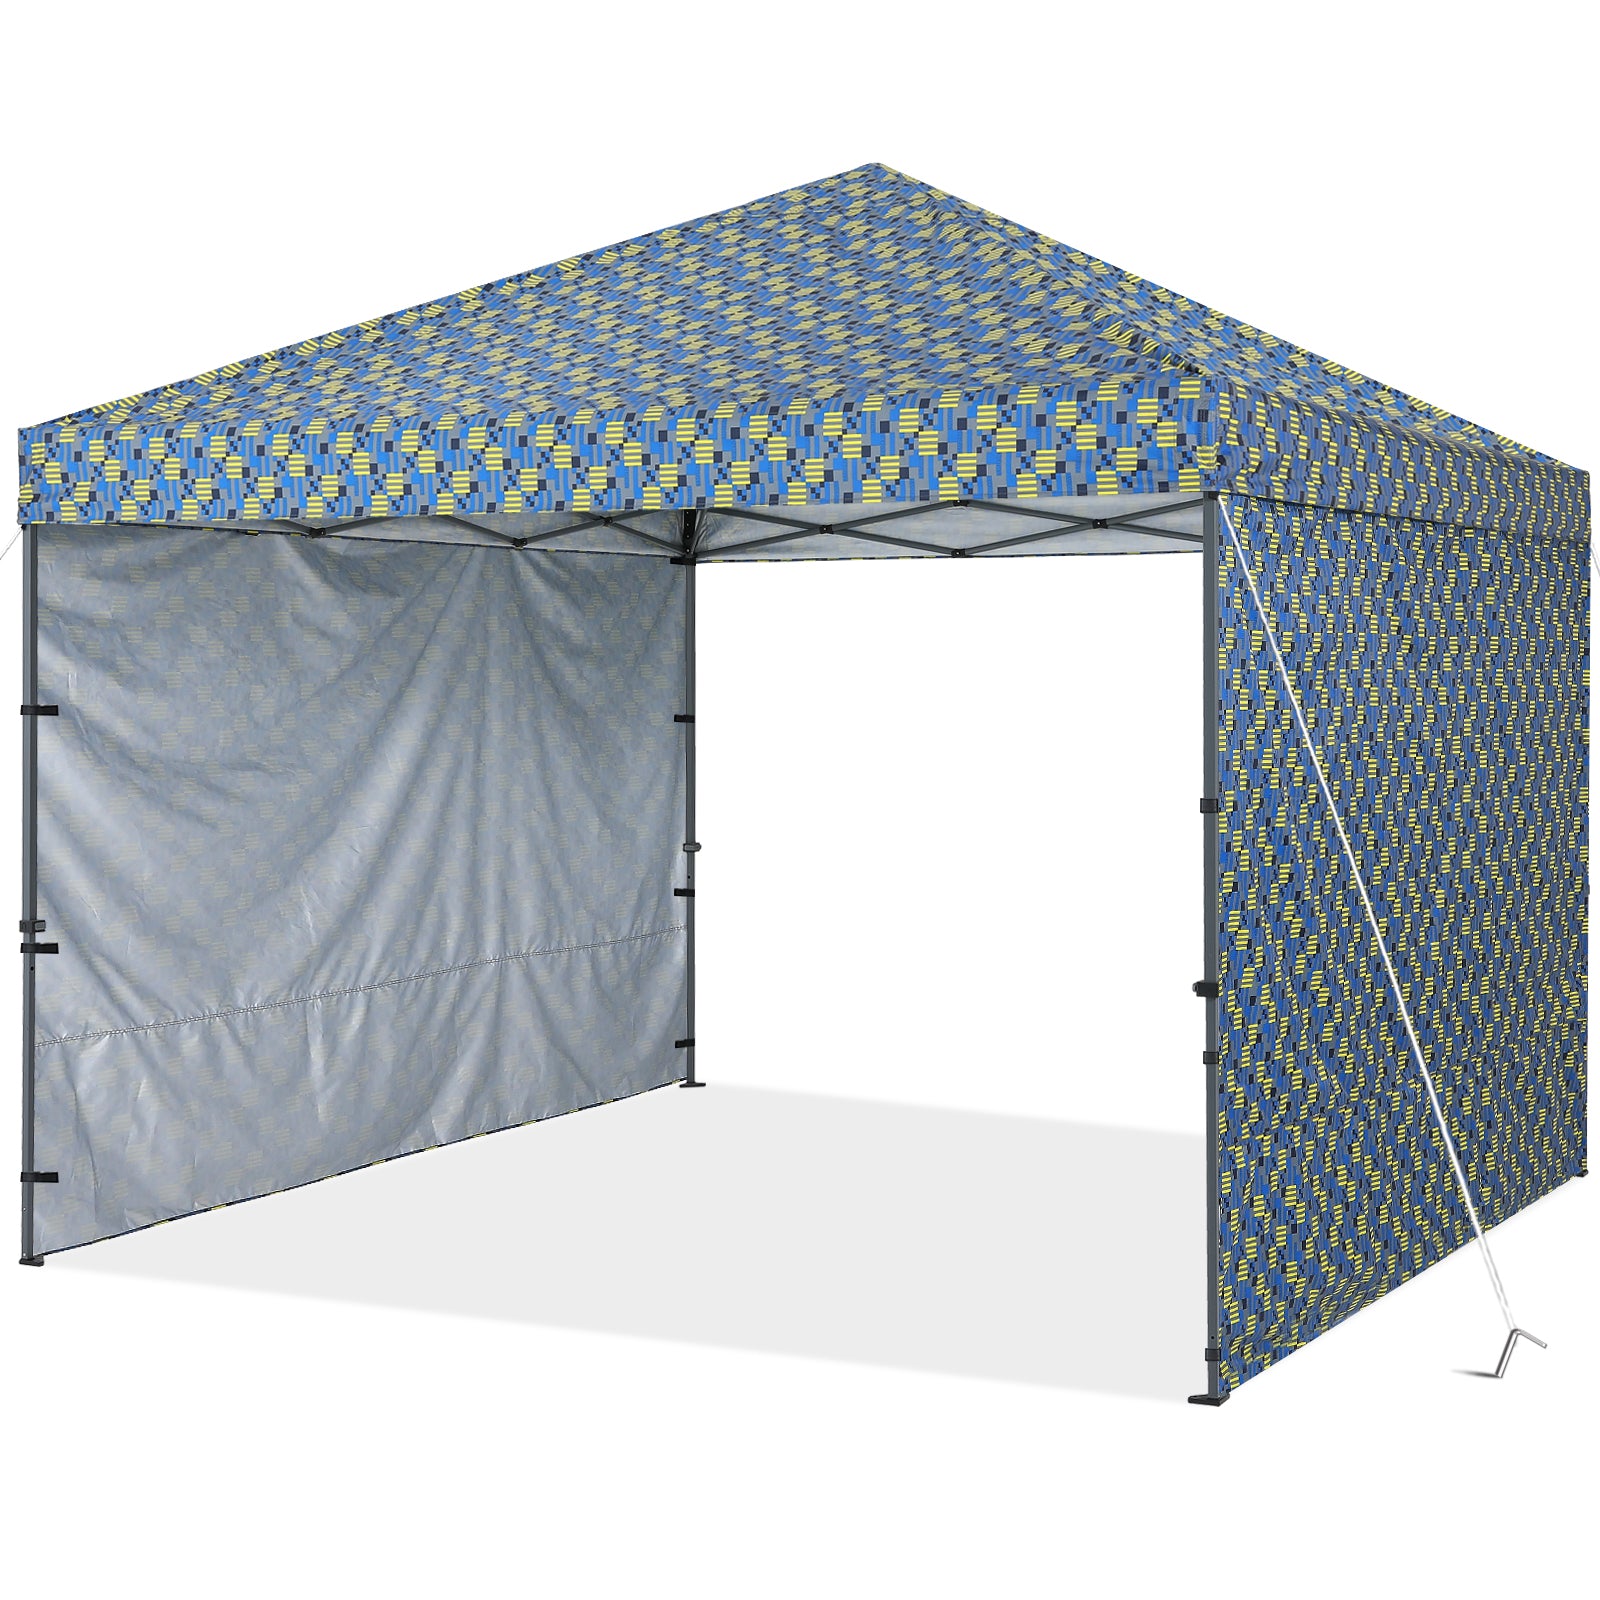 10x10FT Outdoor Easy Pop up Canopy Tent With Graphic Print(2 Sun Walls)